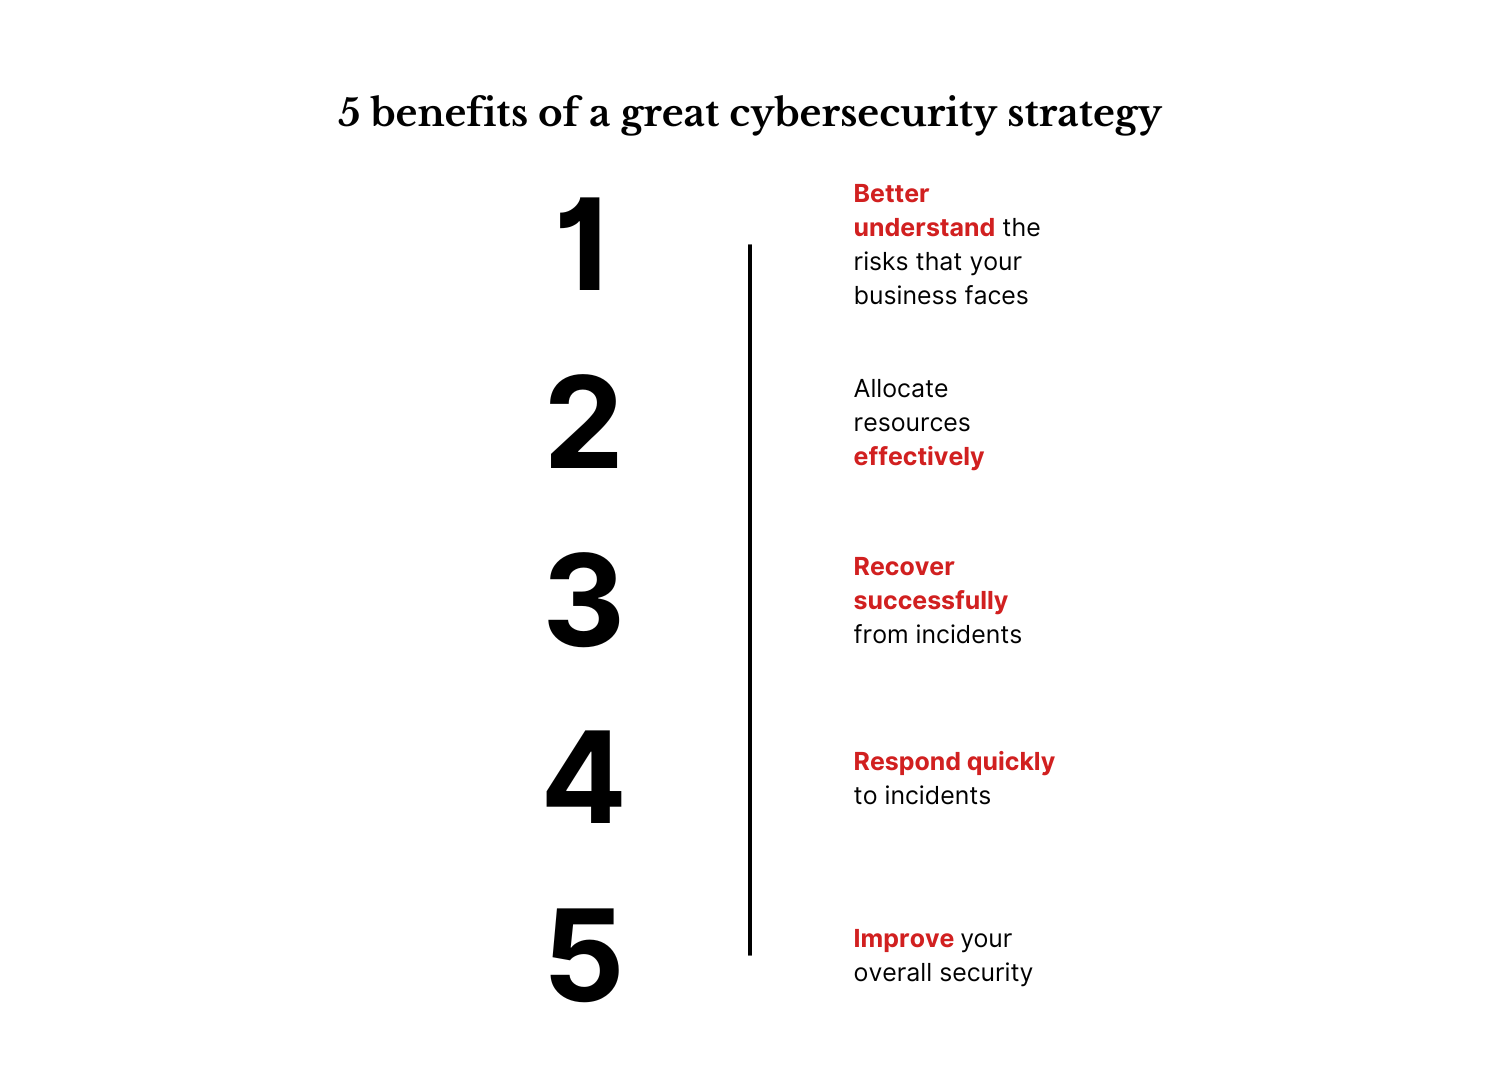 An infographic showing 5 benefits of a great cybersecurity strategy.